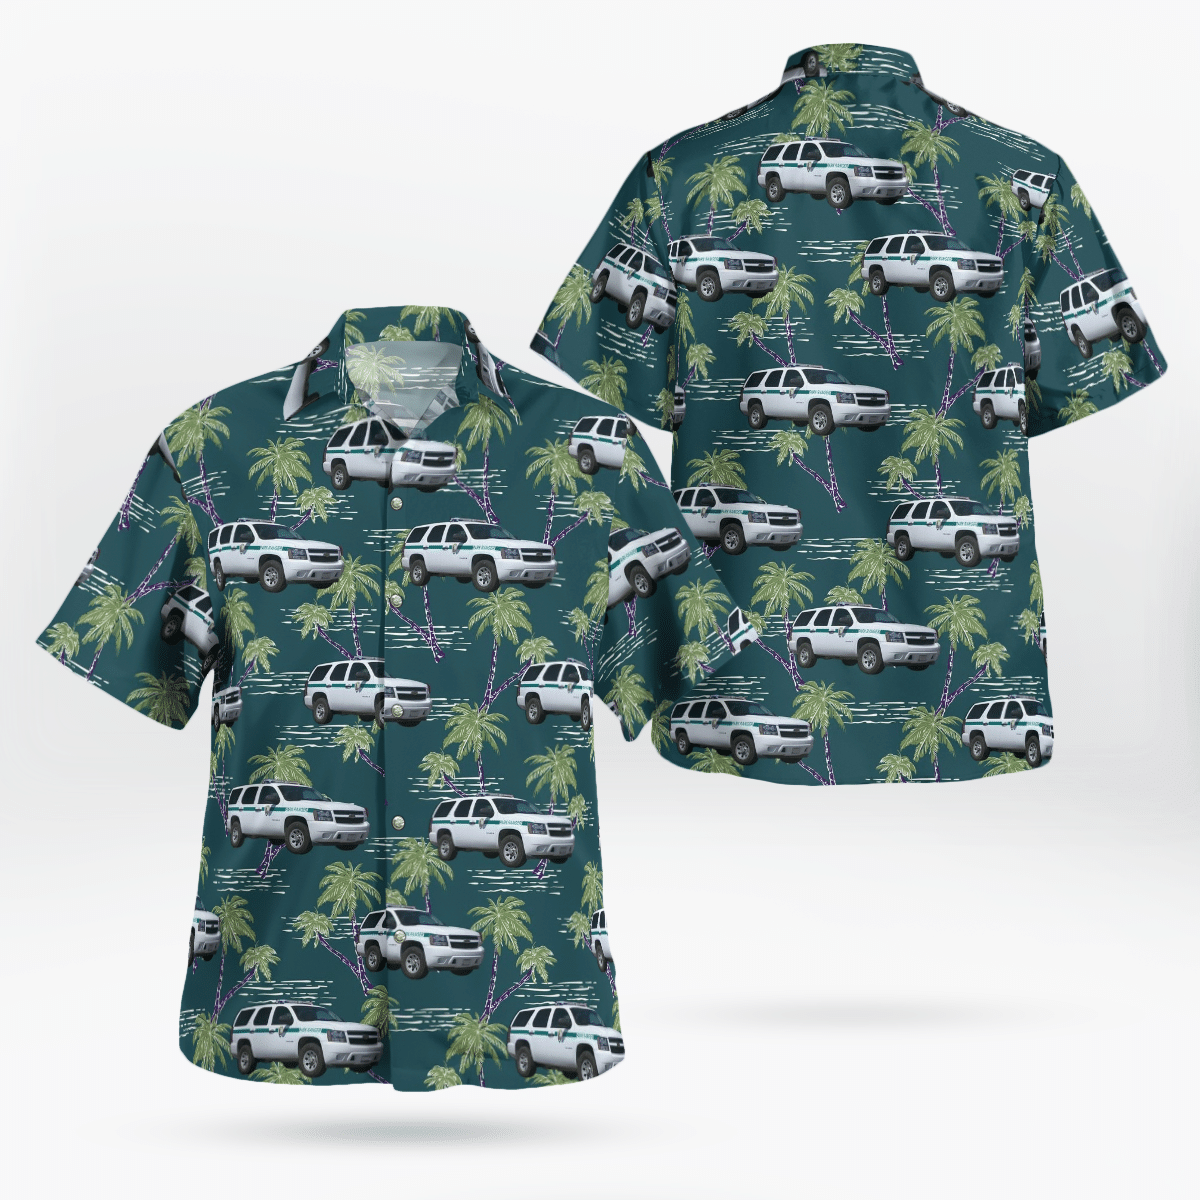 Shop now to find the perfect Hawaii Shirt for your hobby 170